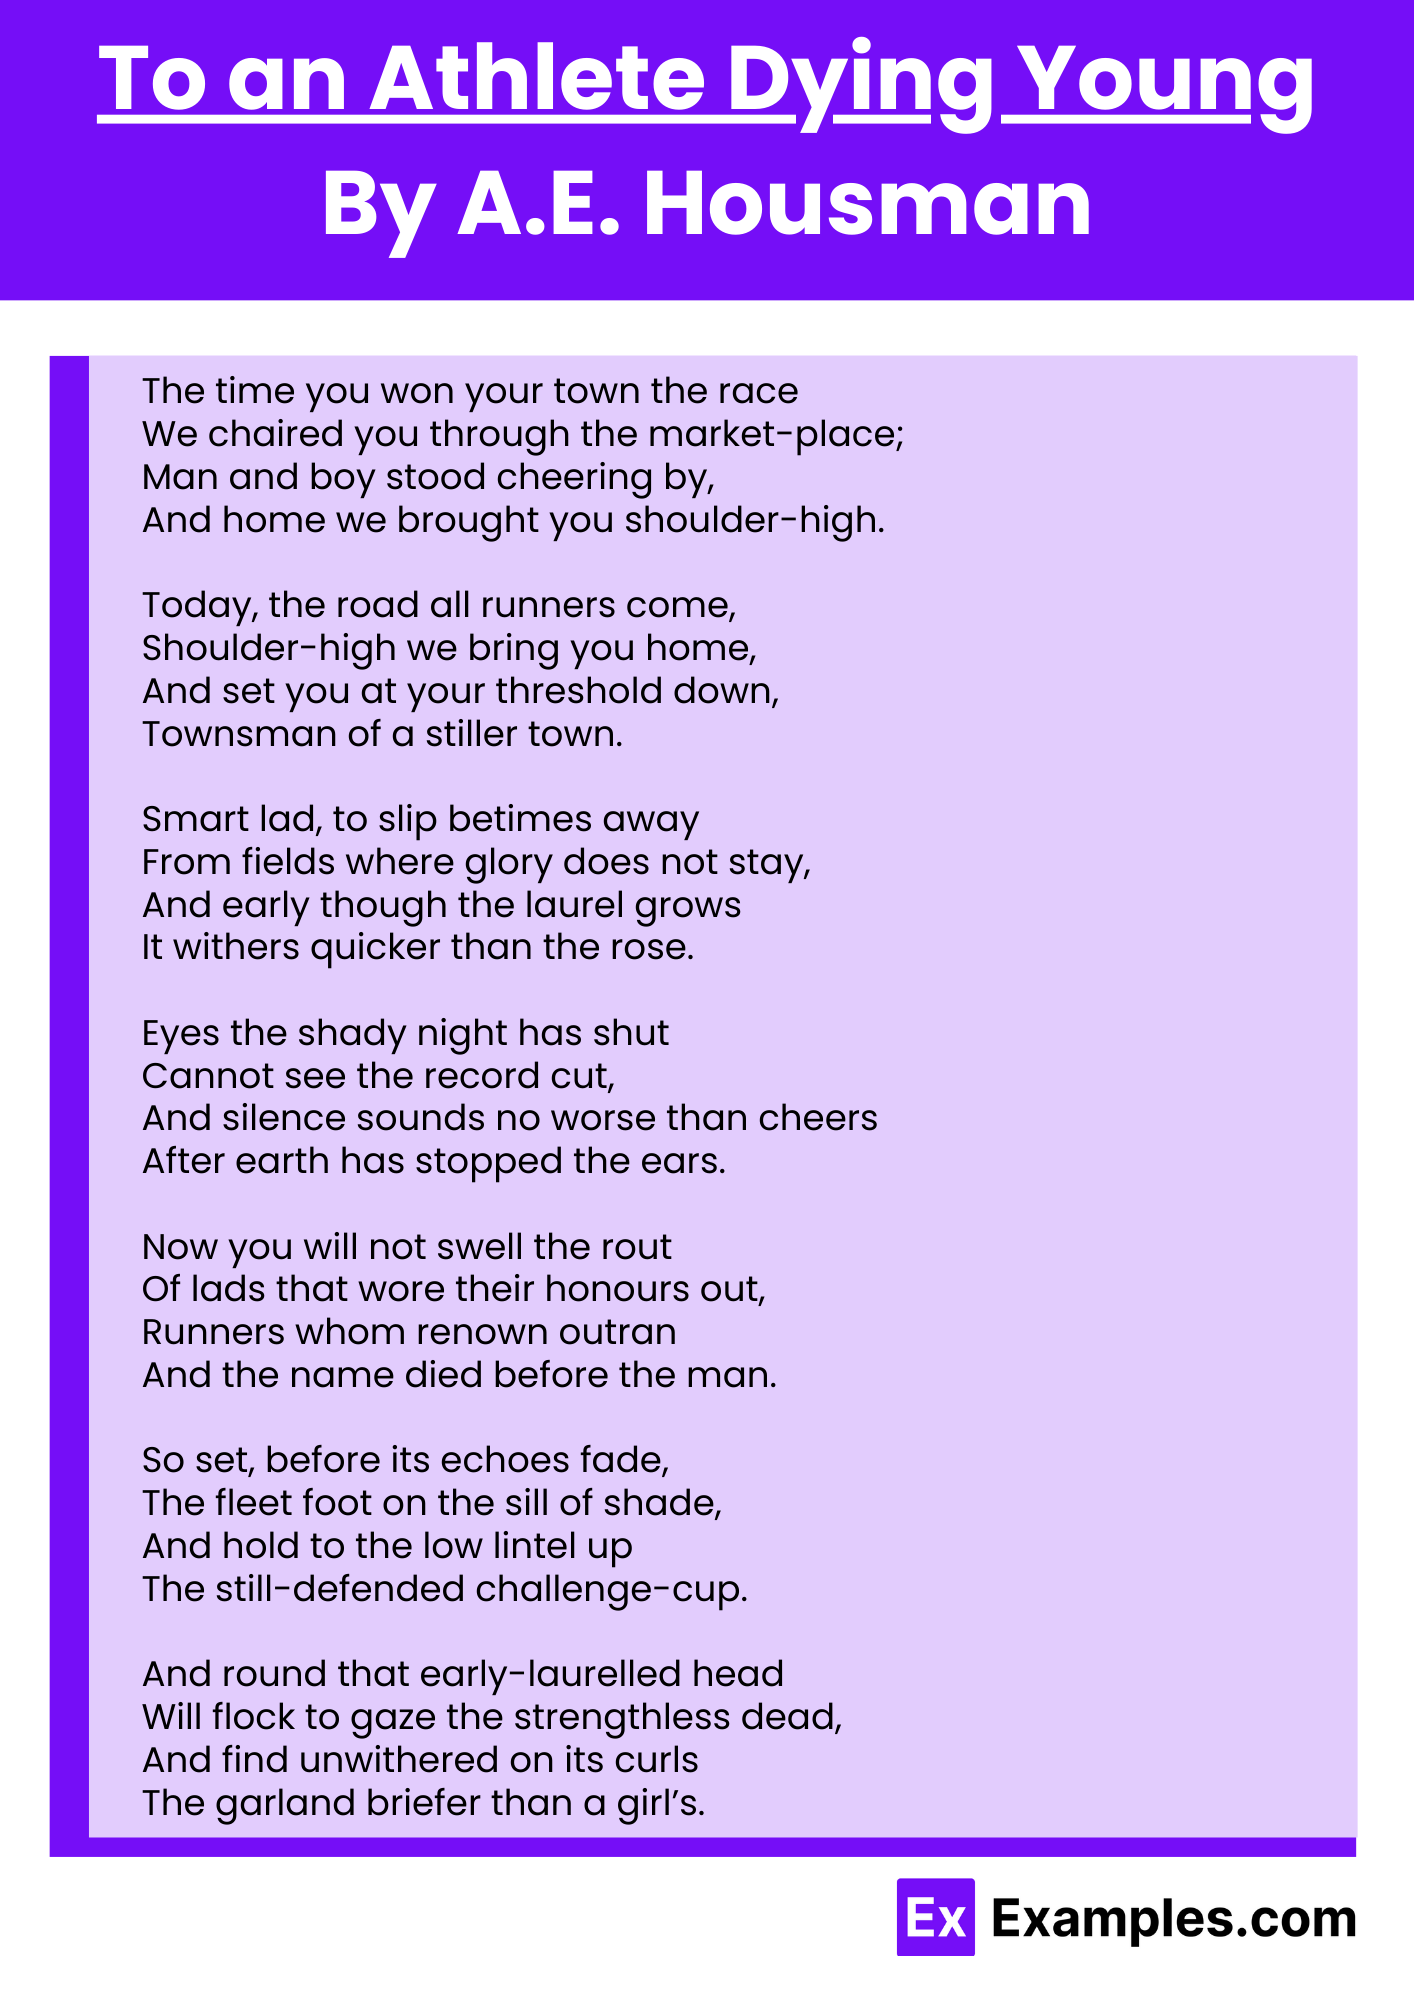 To an Athlete Dying Young By A.E. Housman